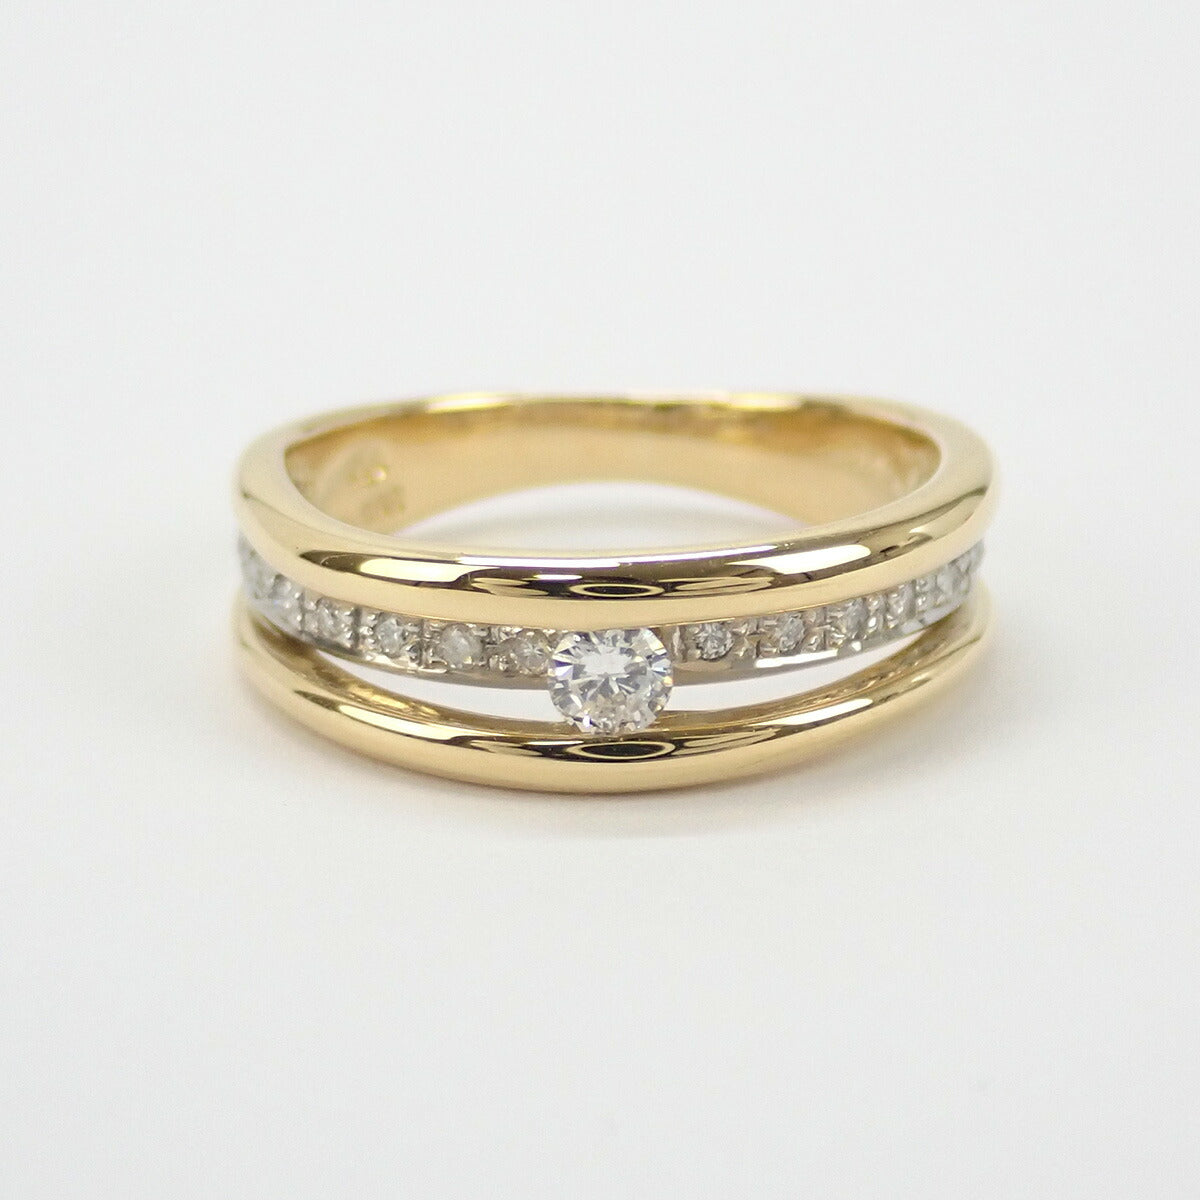 K18YG & Pt900 Designer Diamond Ring 0.20ct, Yellow Gold and Size 8.5, Ladies (Pre-owned)